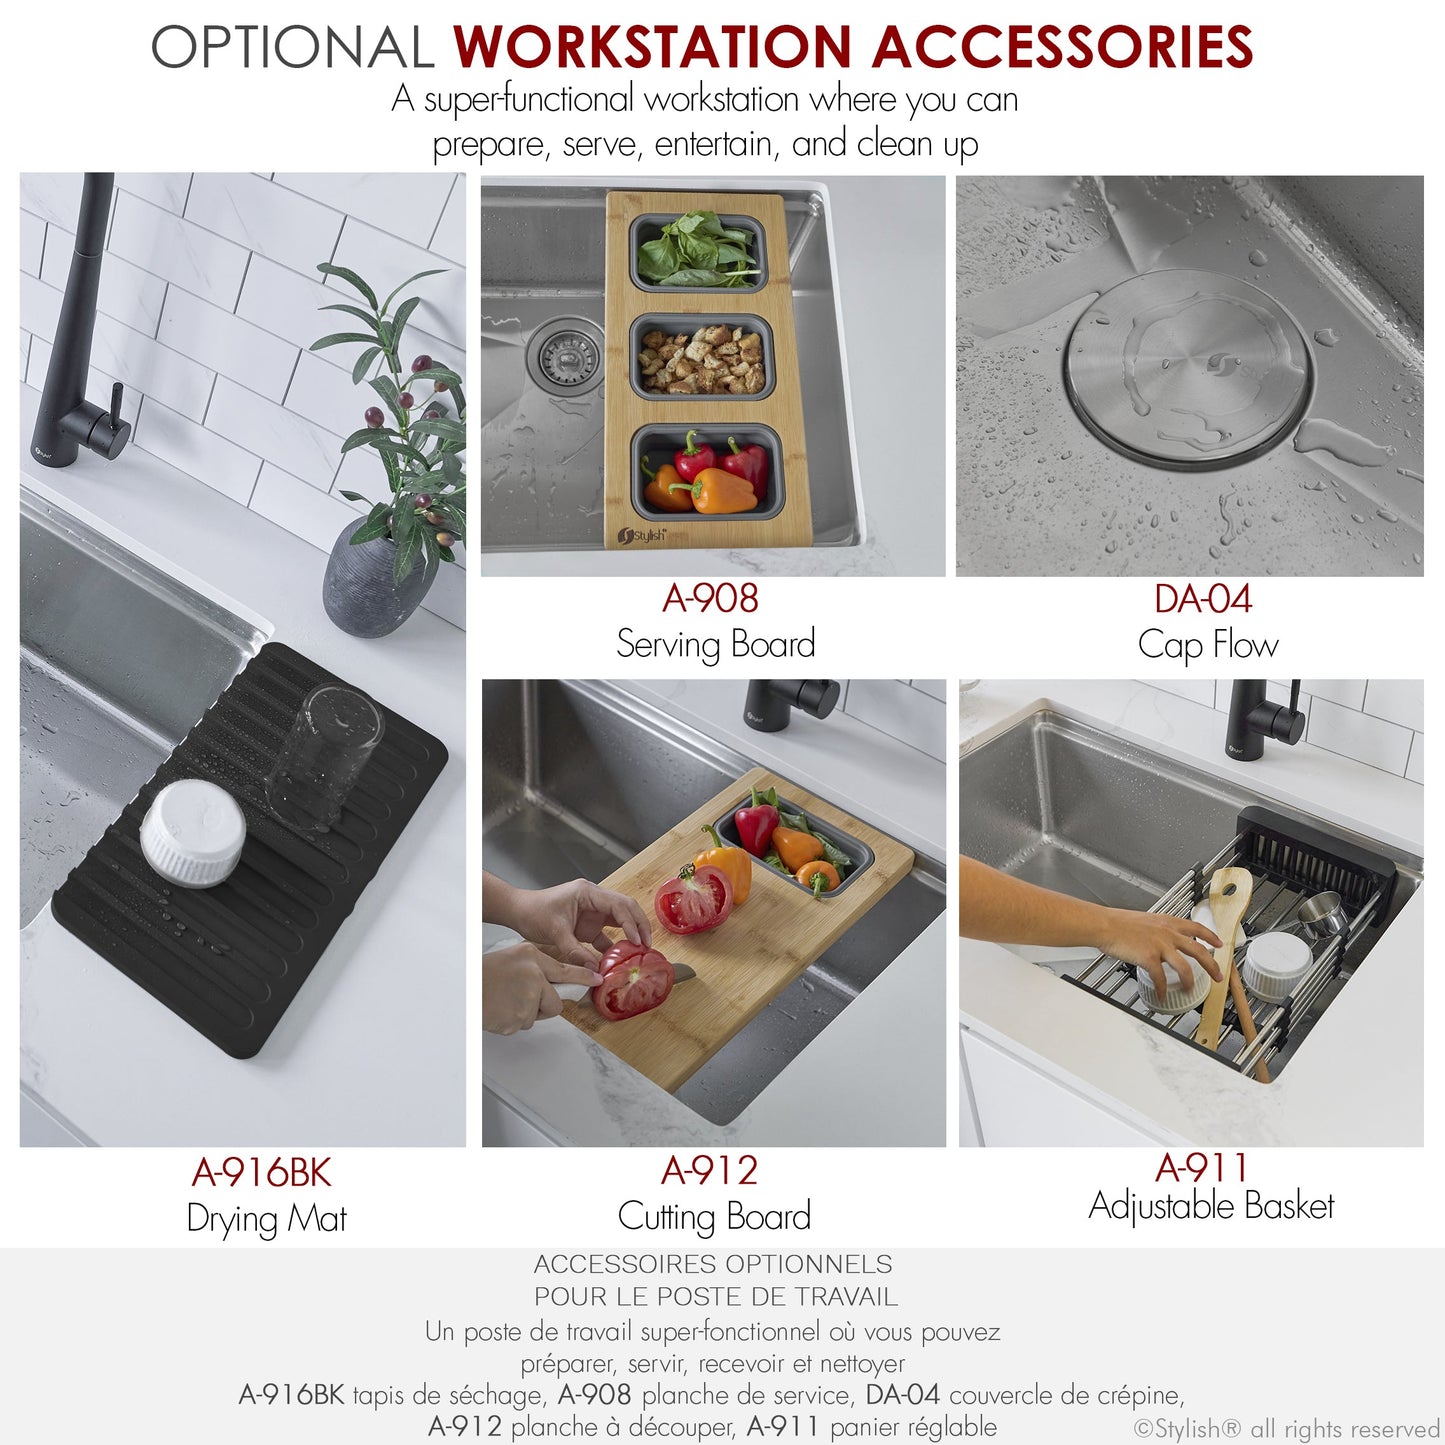 Stylish - Argon 27 inch Workstation Single Bowl Undermount and Drop-in 16 Gauge Stainless Steel Kitchen Sink with Built in Accessories